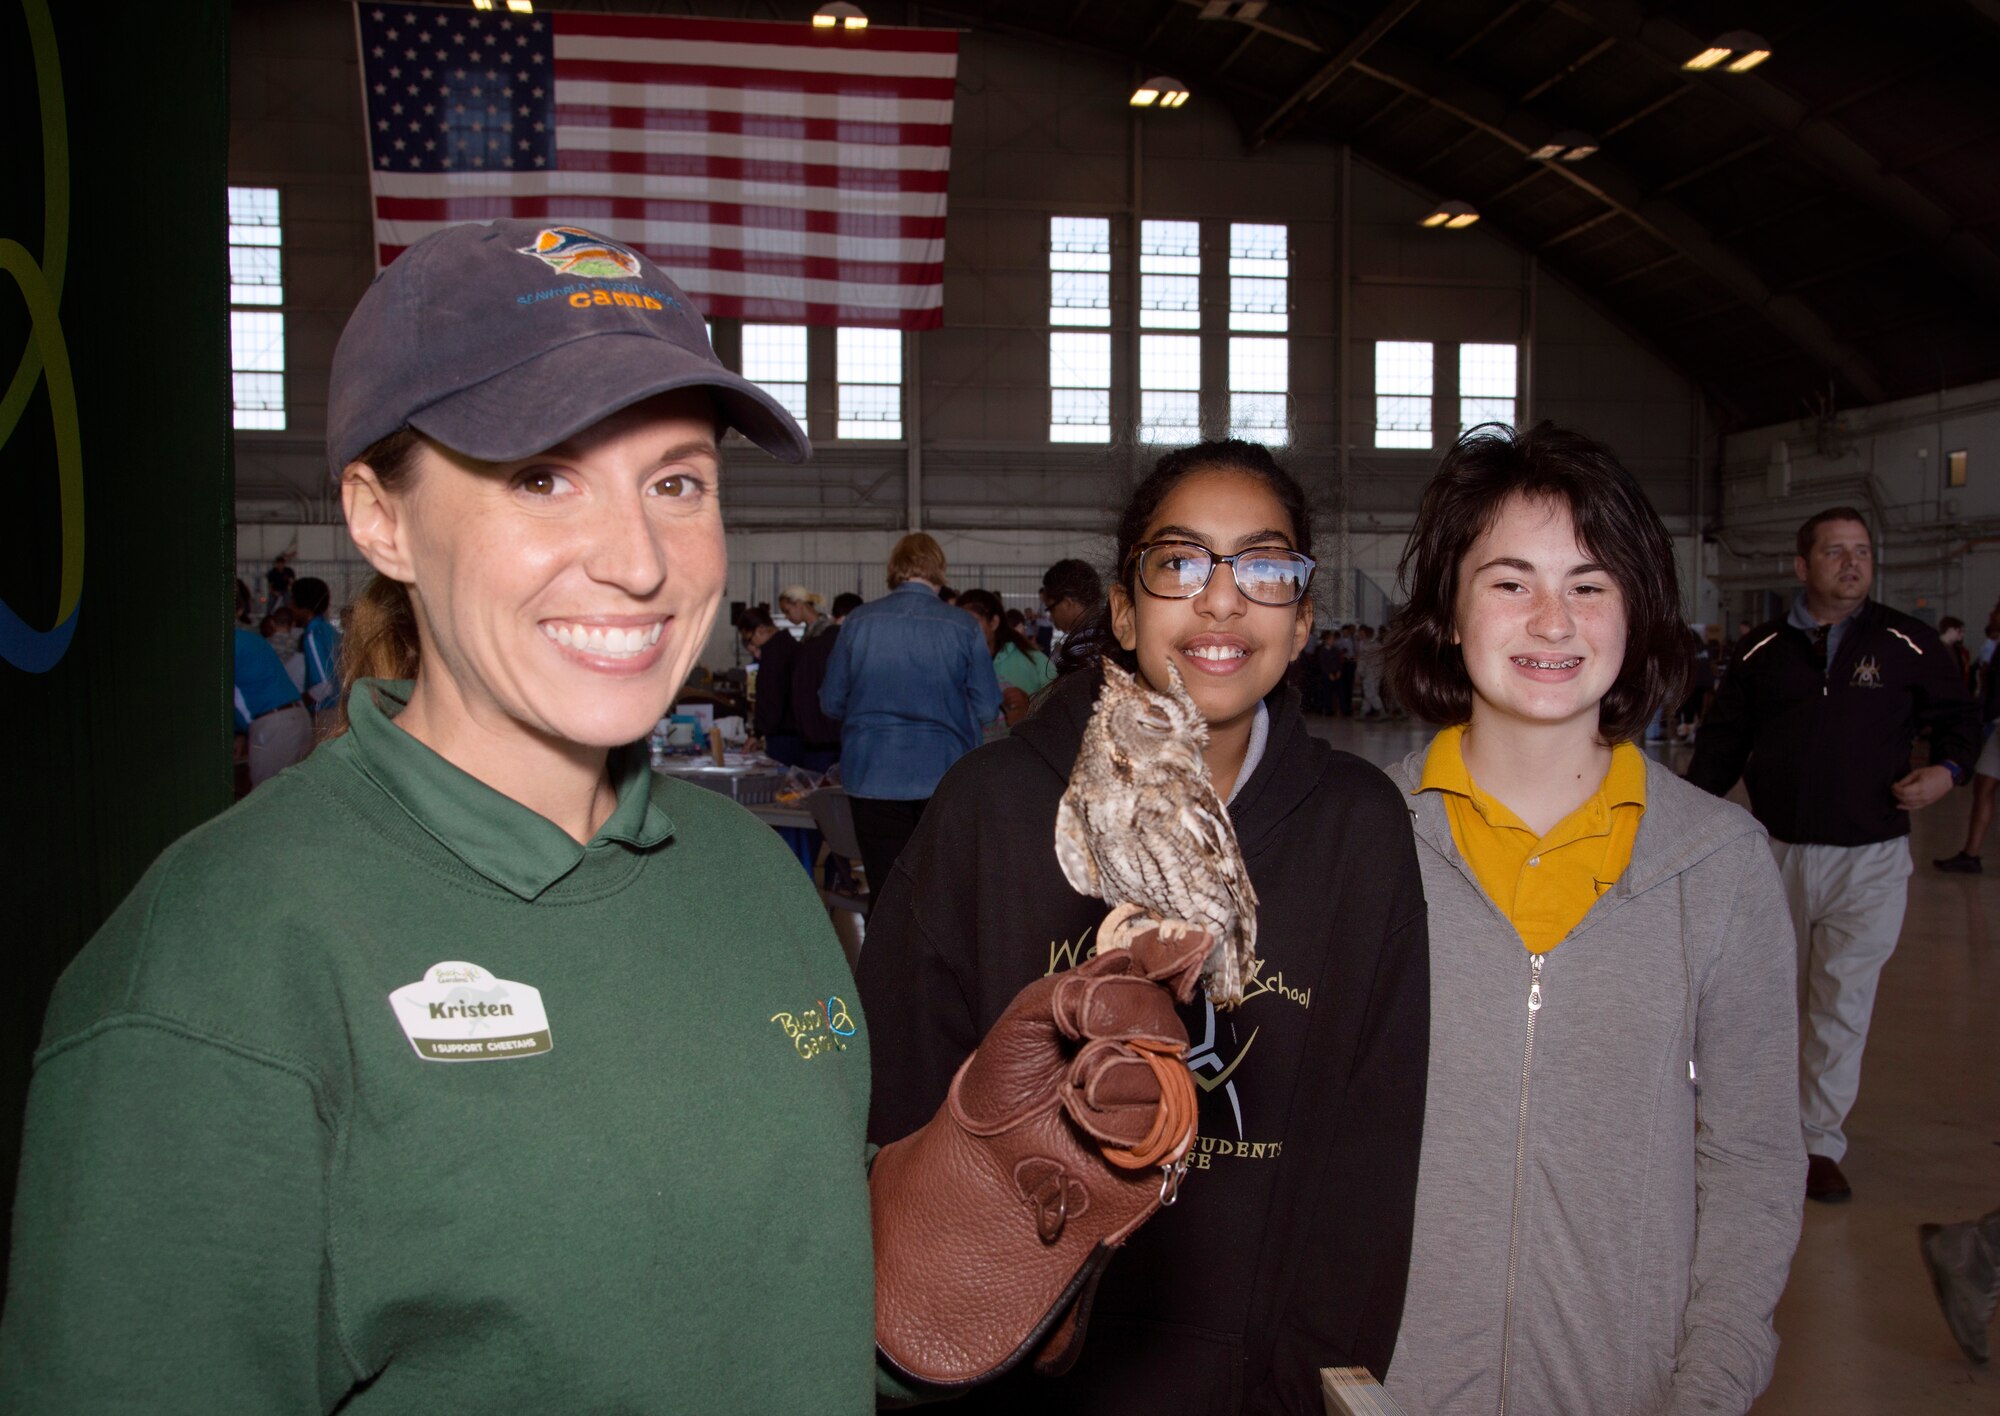 Kristen Gefre, a Busch Gardens education instructor, pauses for a photo with students during the Science, Technology, Engineering, Arts and Math (STEAM) Day at MacDill Air Force Base, Fla., March 21, 2018.